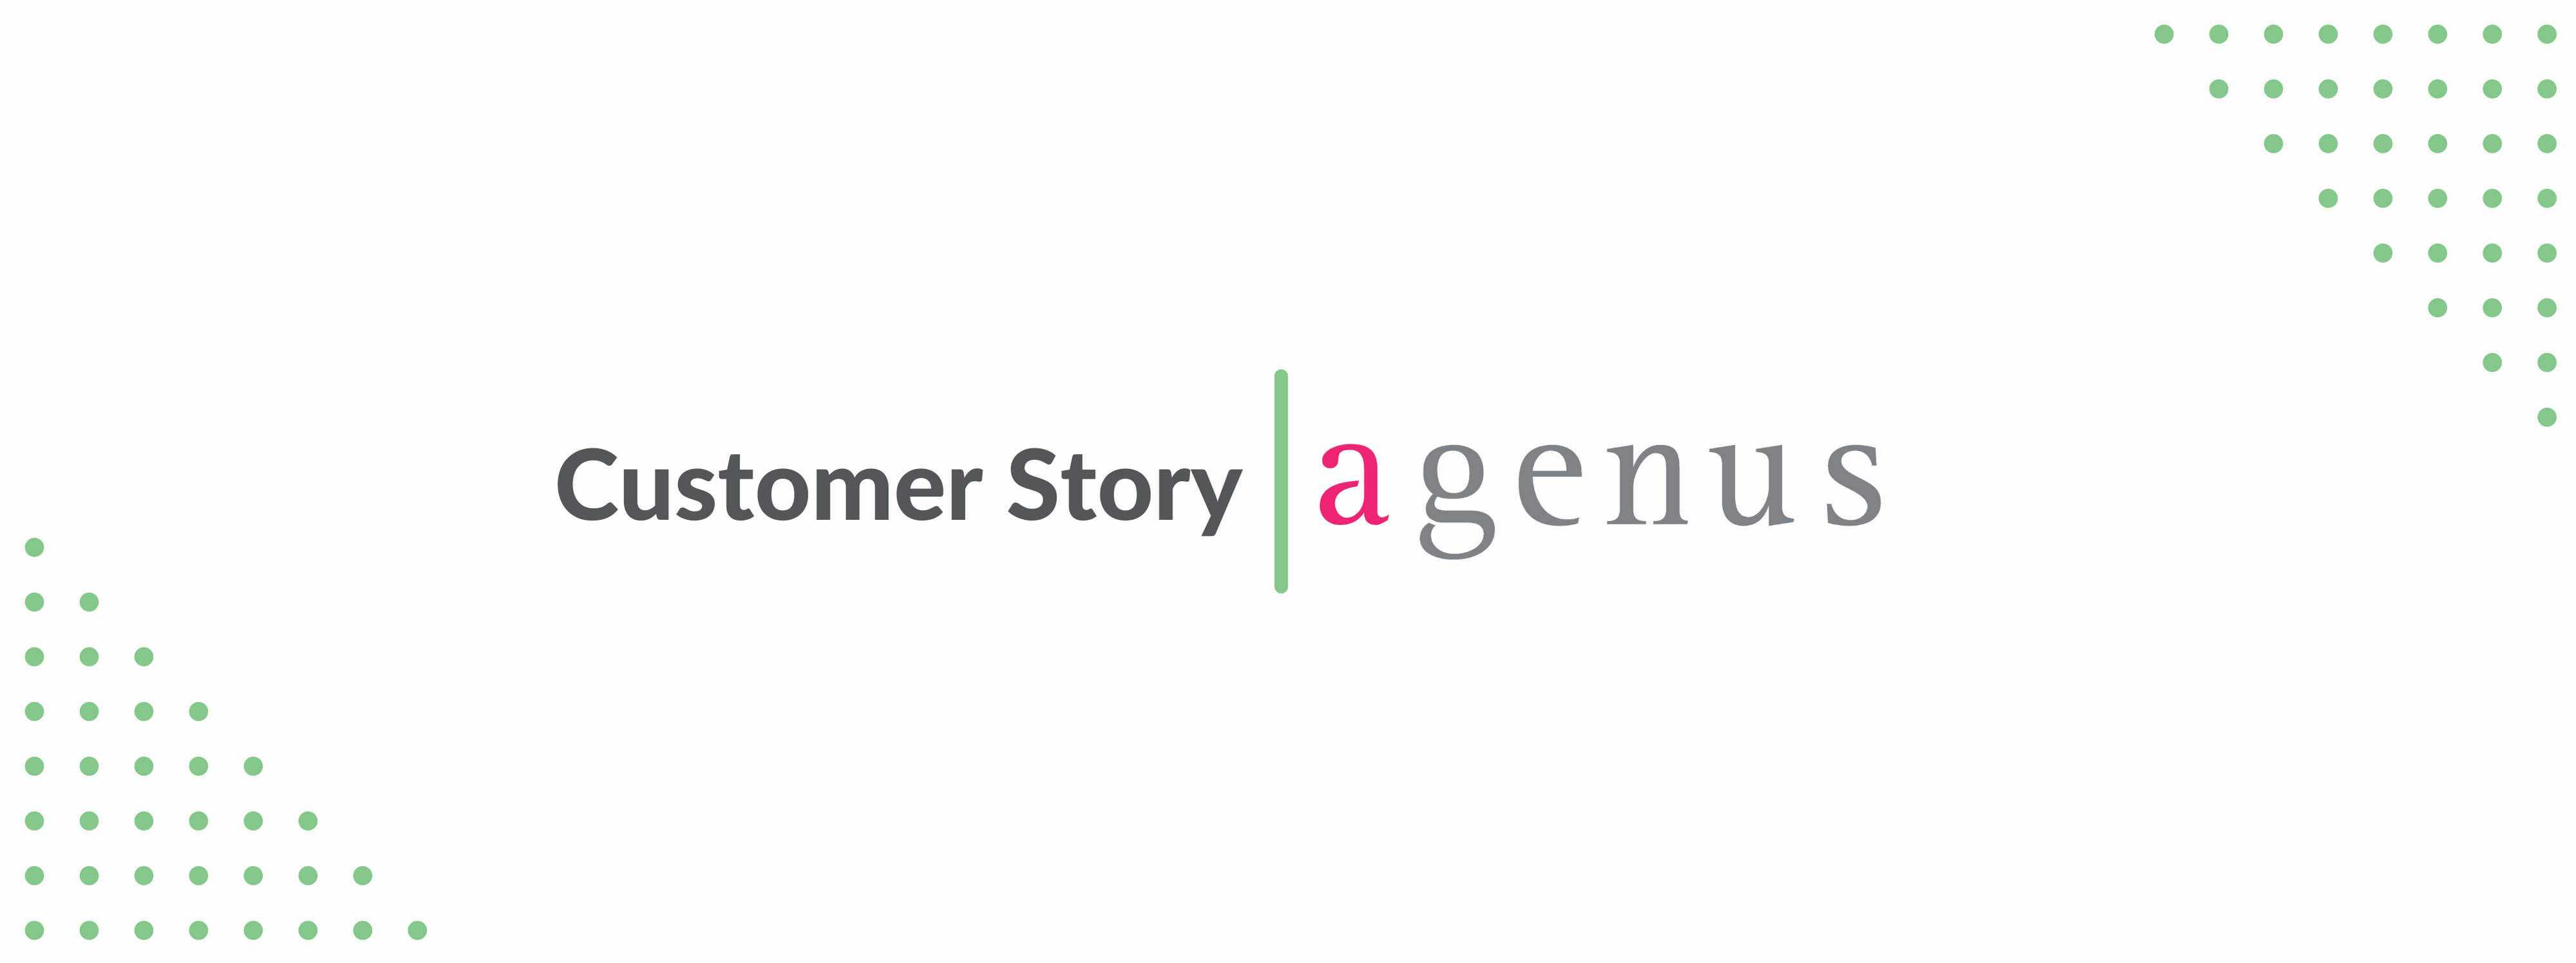 Agenus Switched to ZenQMS for More Transparency, Flexibility, and Affordability